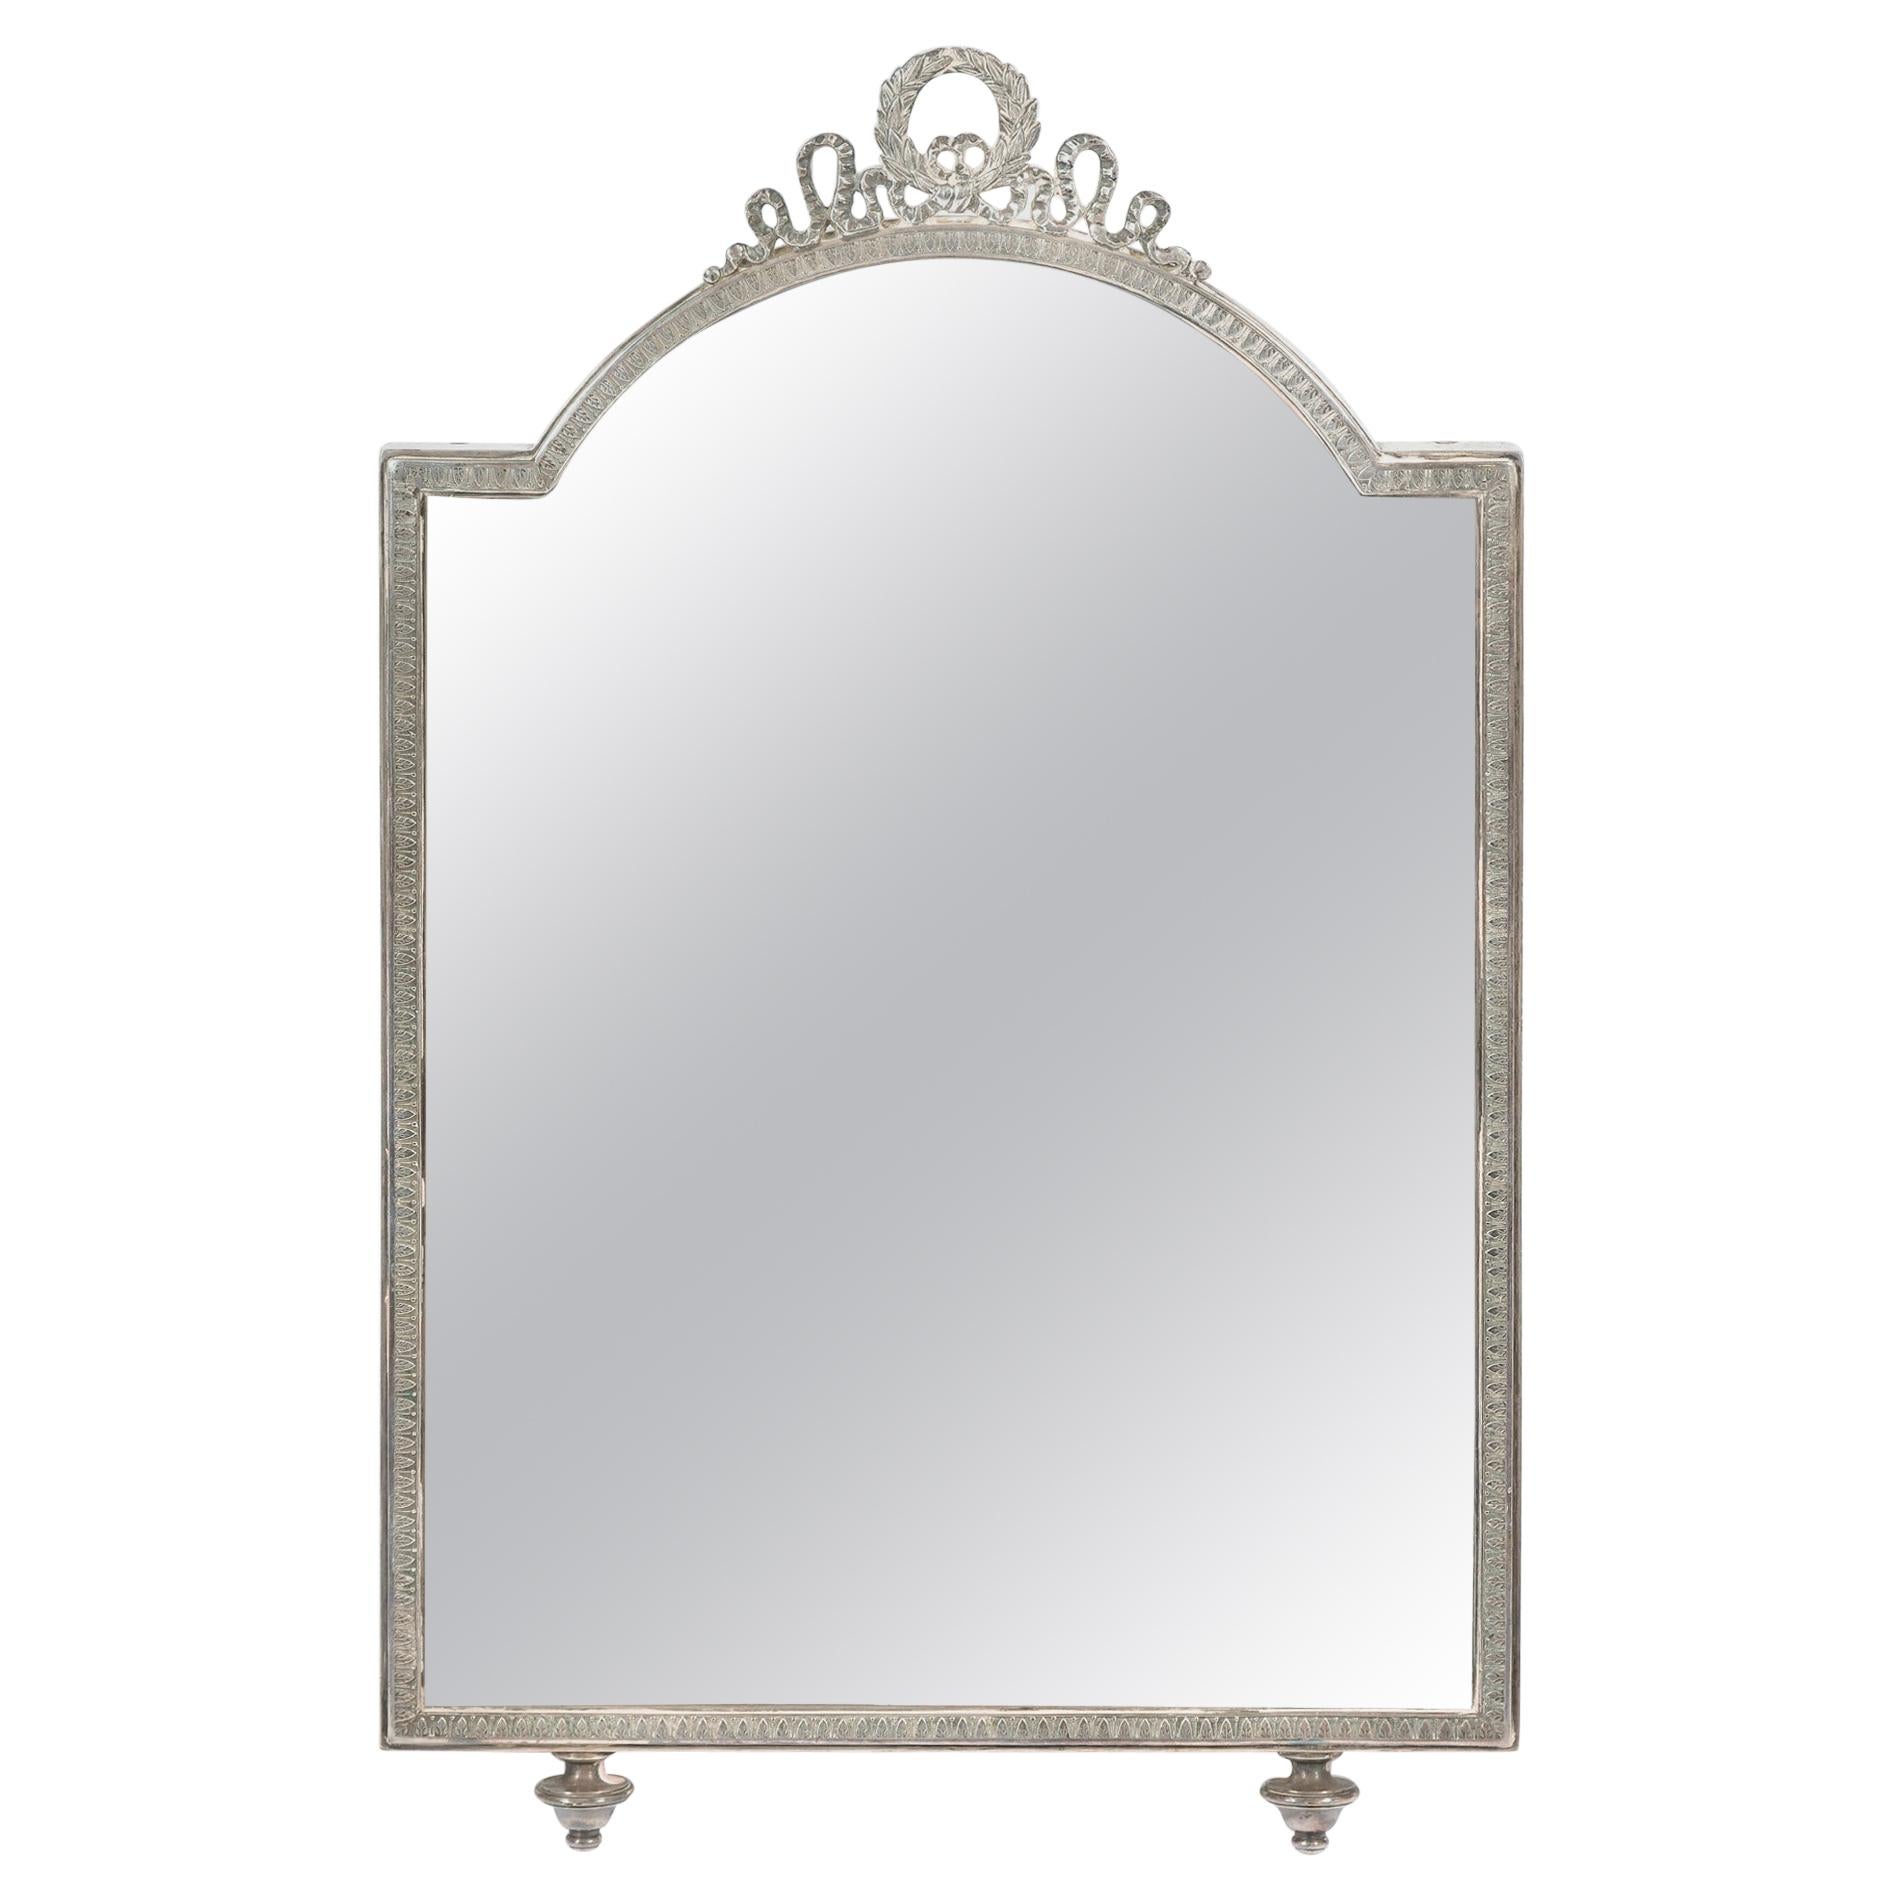 Continental 1940's Silver Plated Dressing-Table Mirror